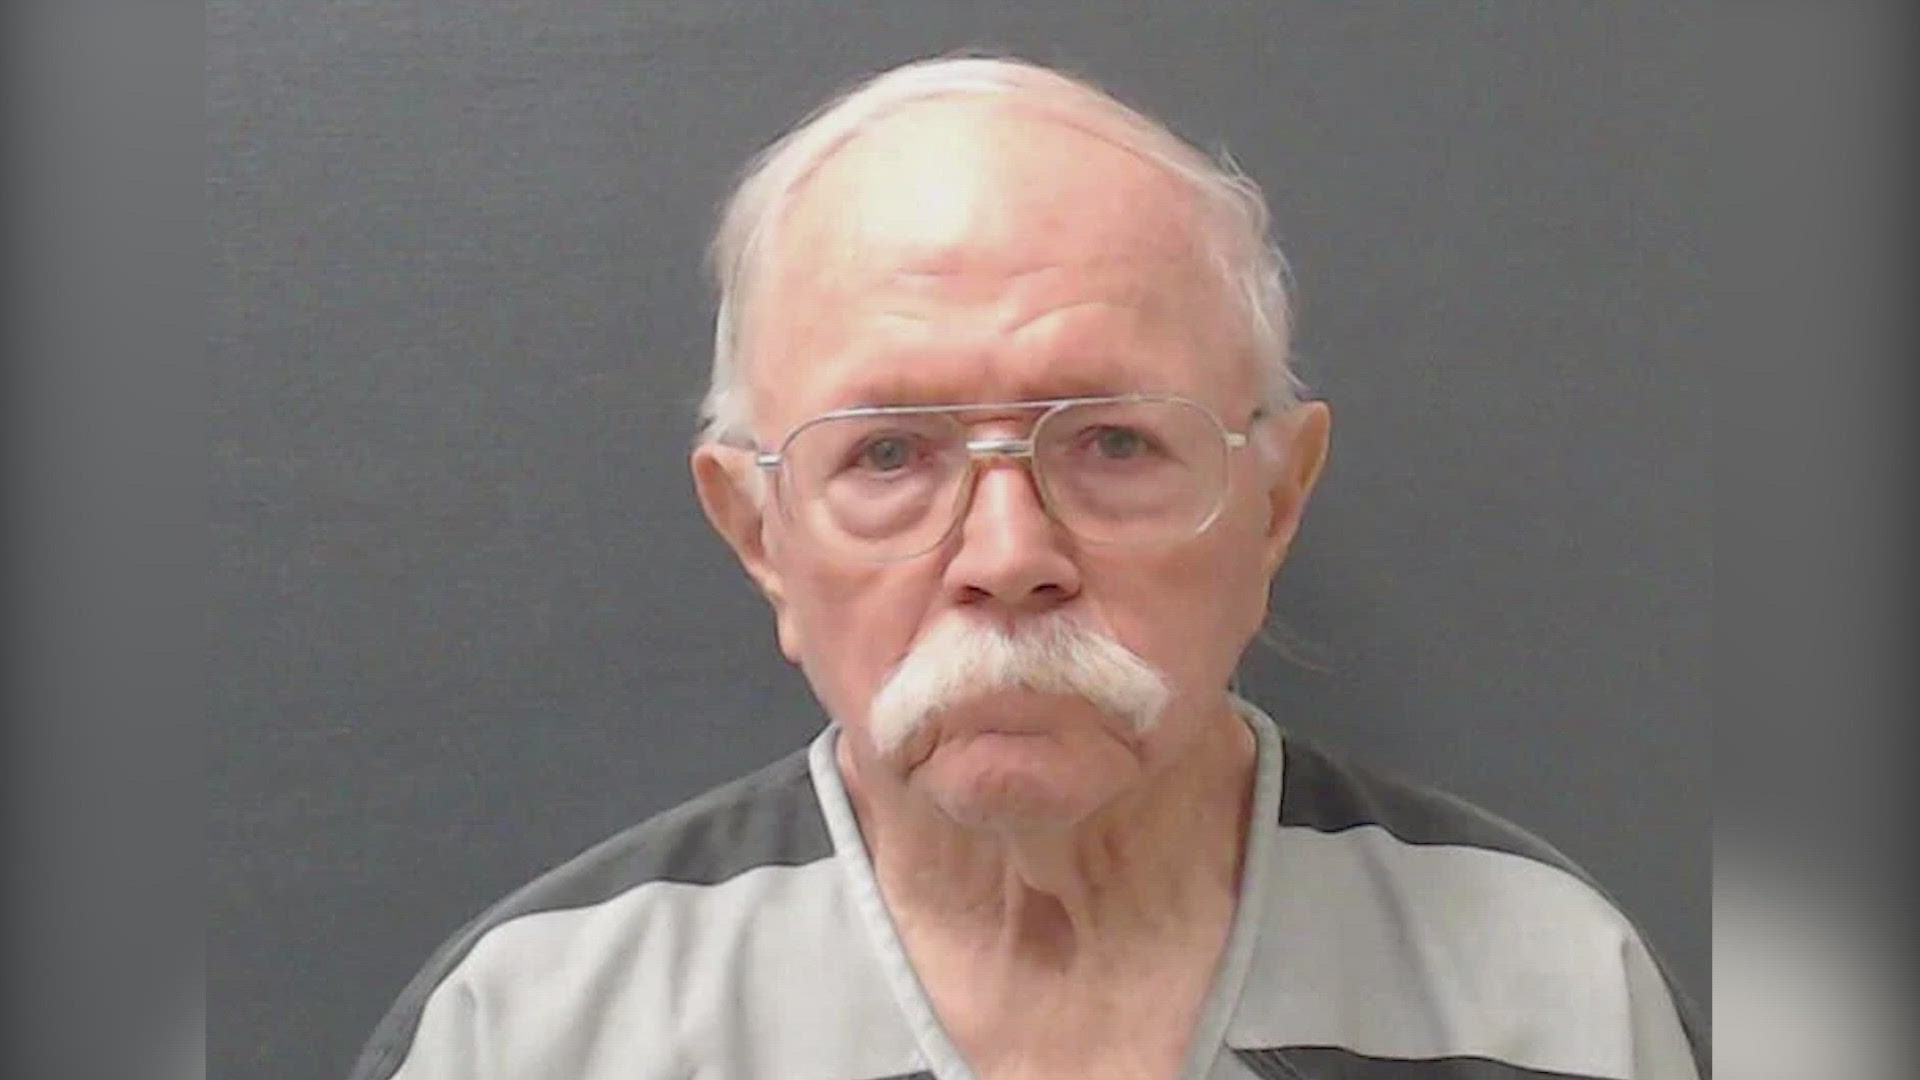 76-year-old Michael Paul Morrish was arrested on Tuesday.